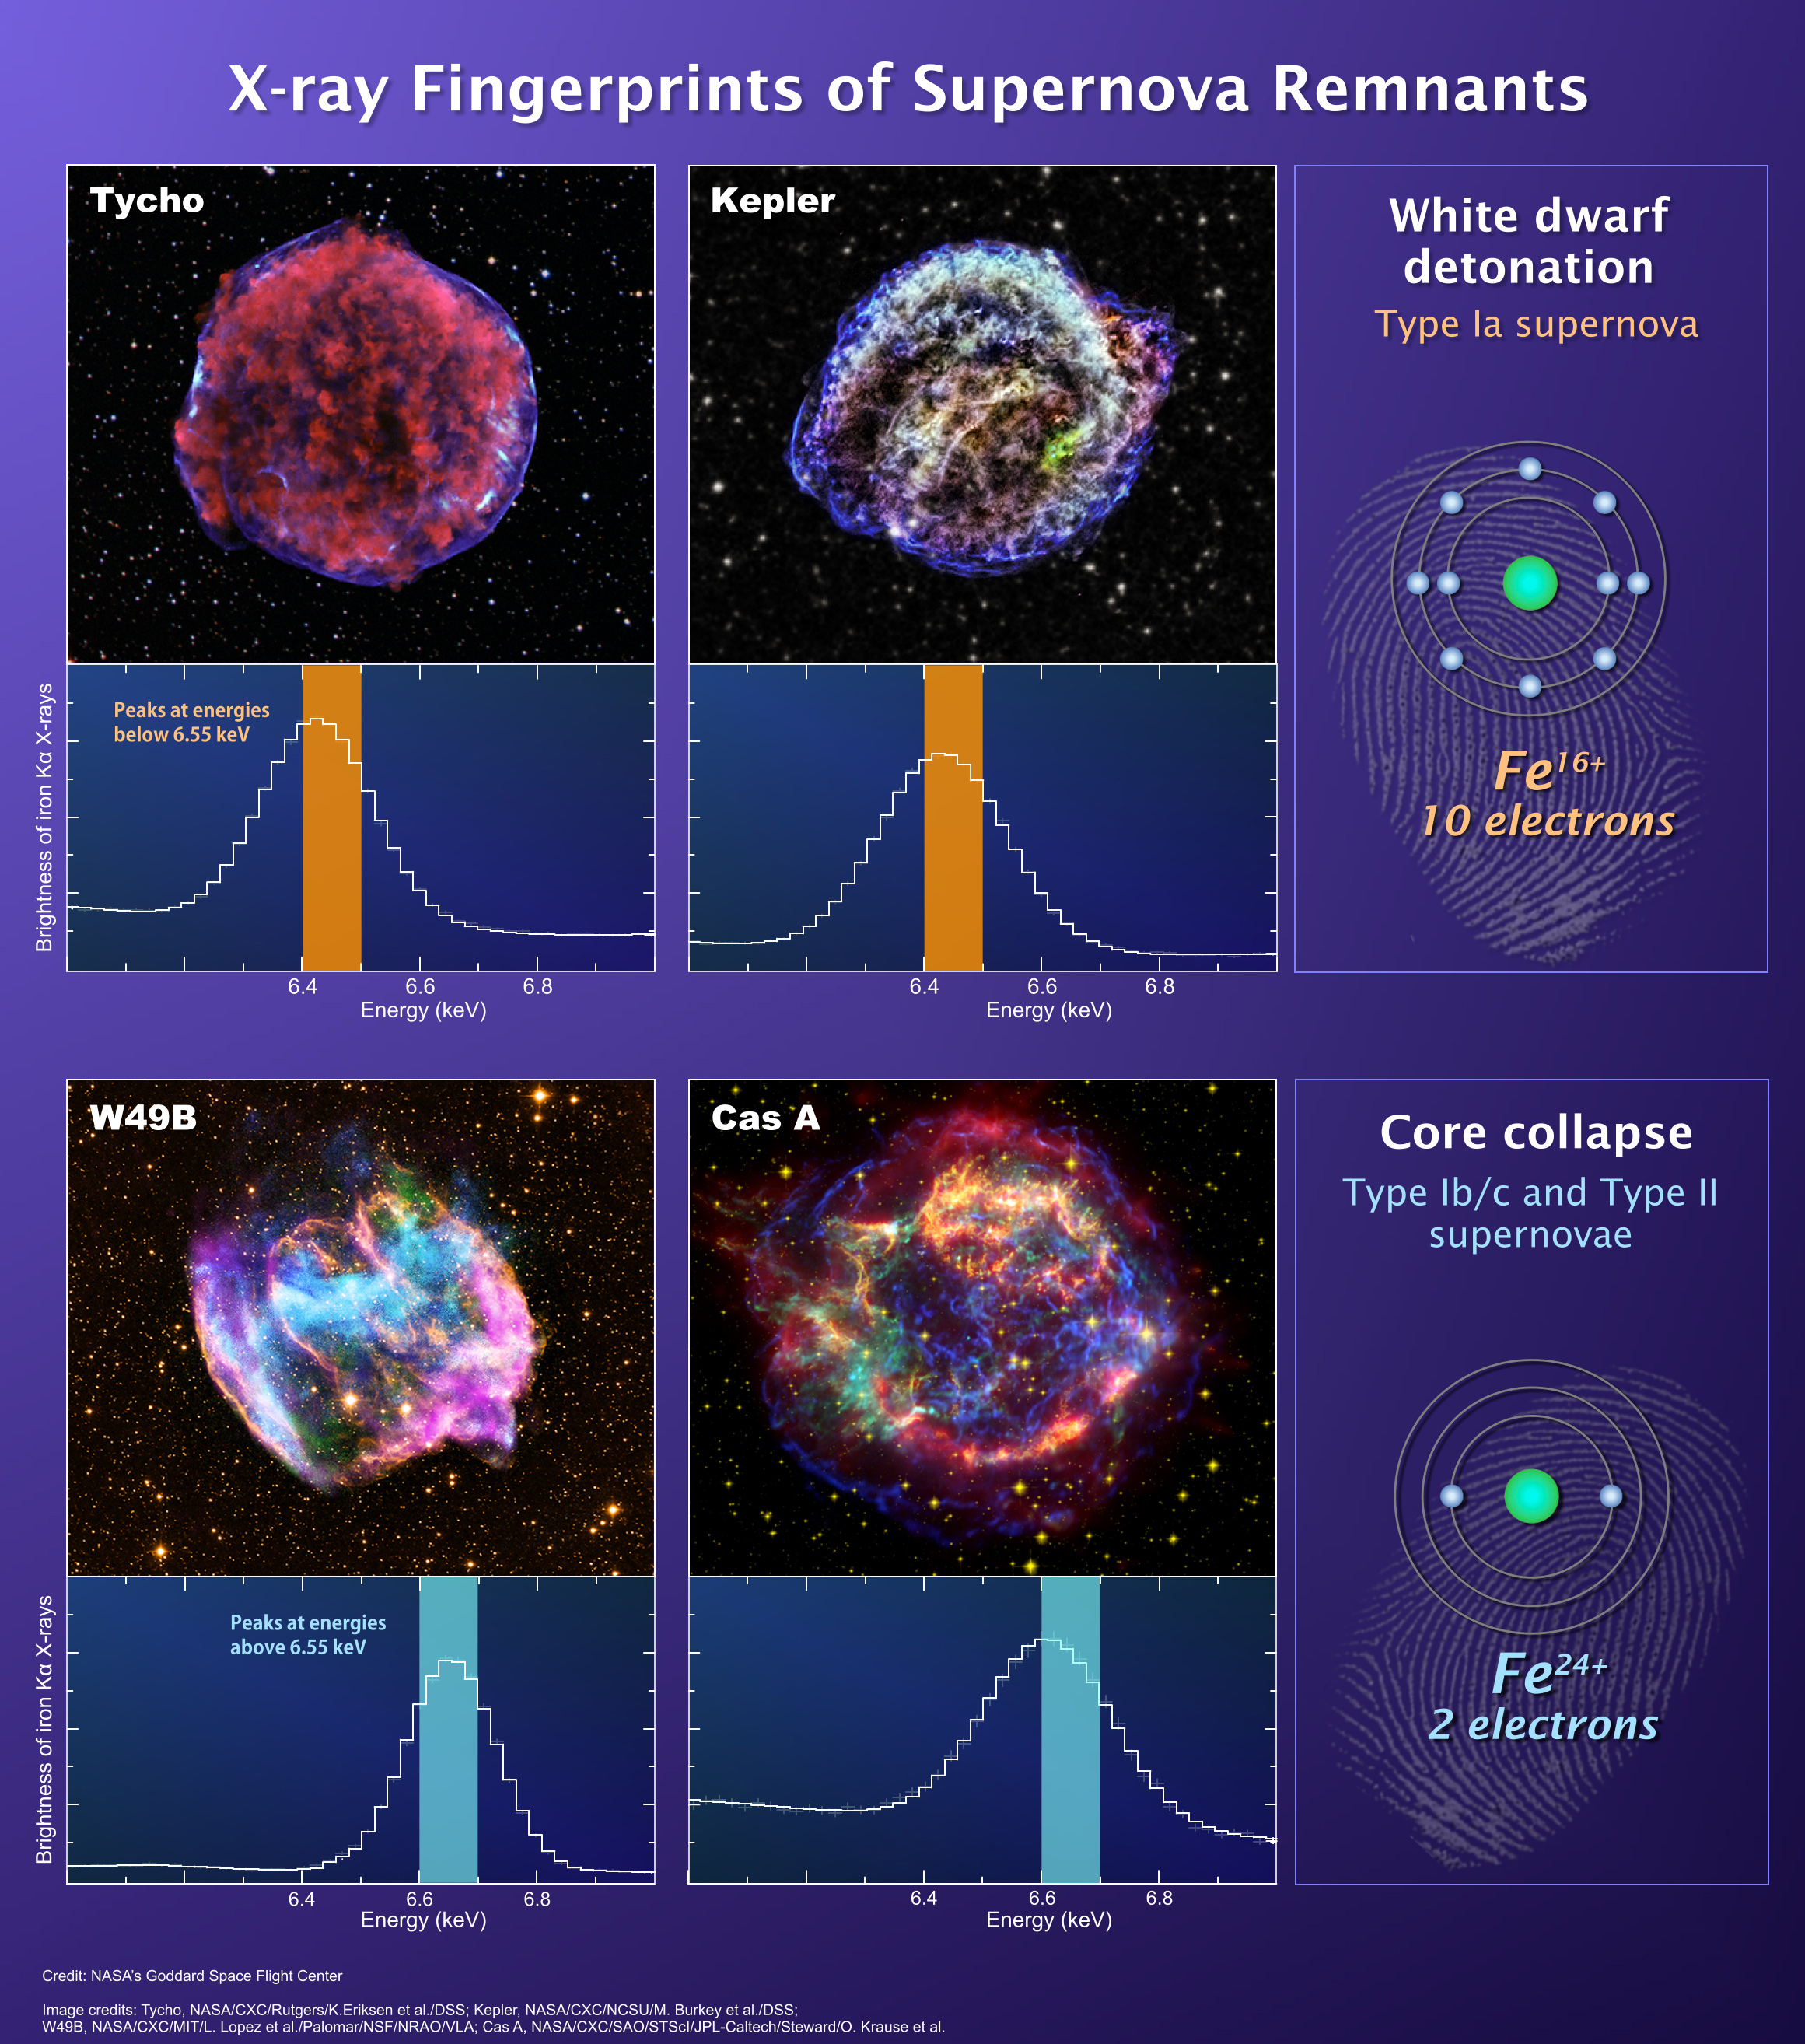 supernova remnant images and spectra reveal a difference	between supernova types